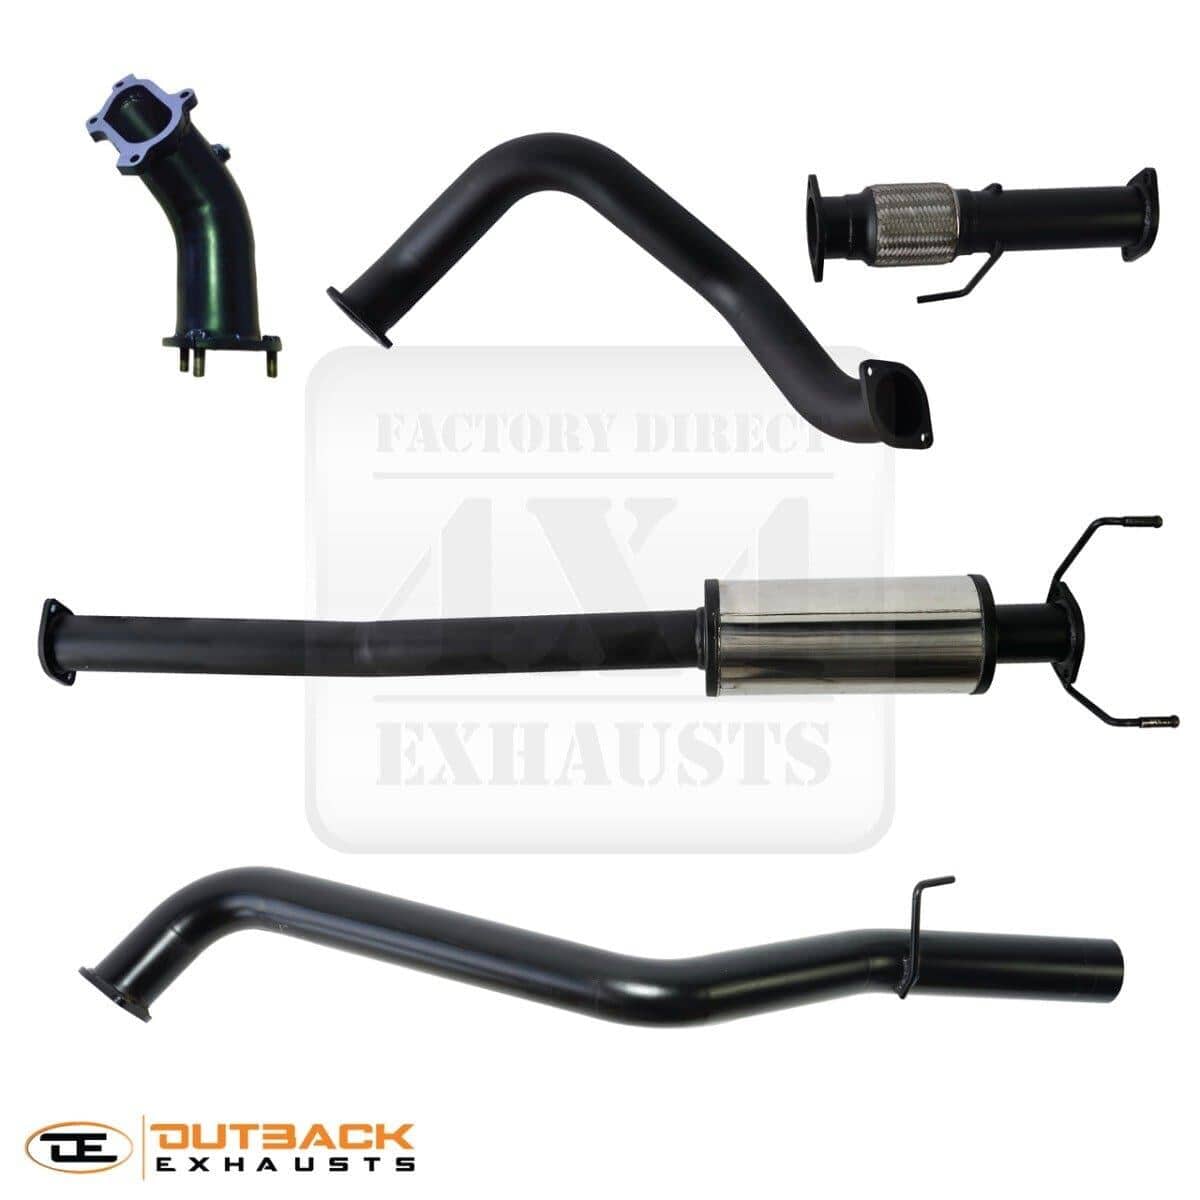 Outback 3" Stainless Steel Exhaust to suit Toyota Hilux KZN165R 04/1999-05/2003 - NZ Offroader